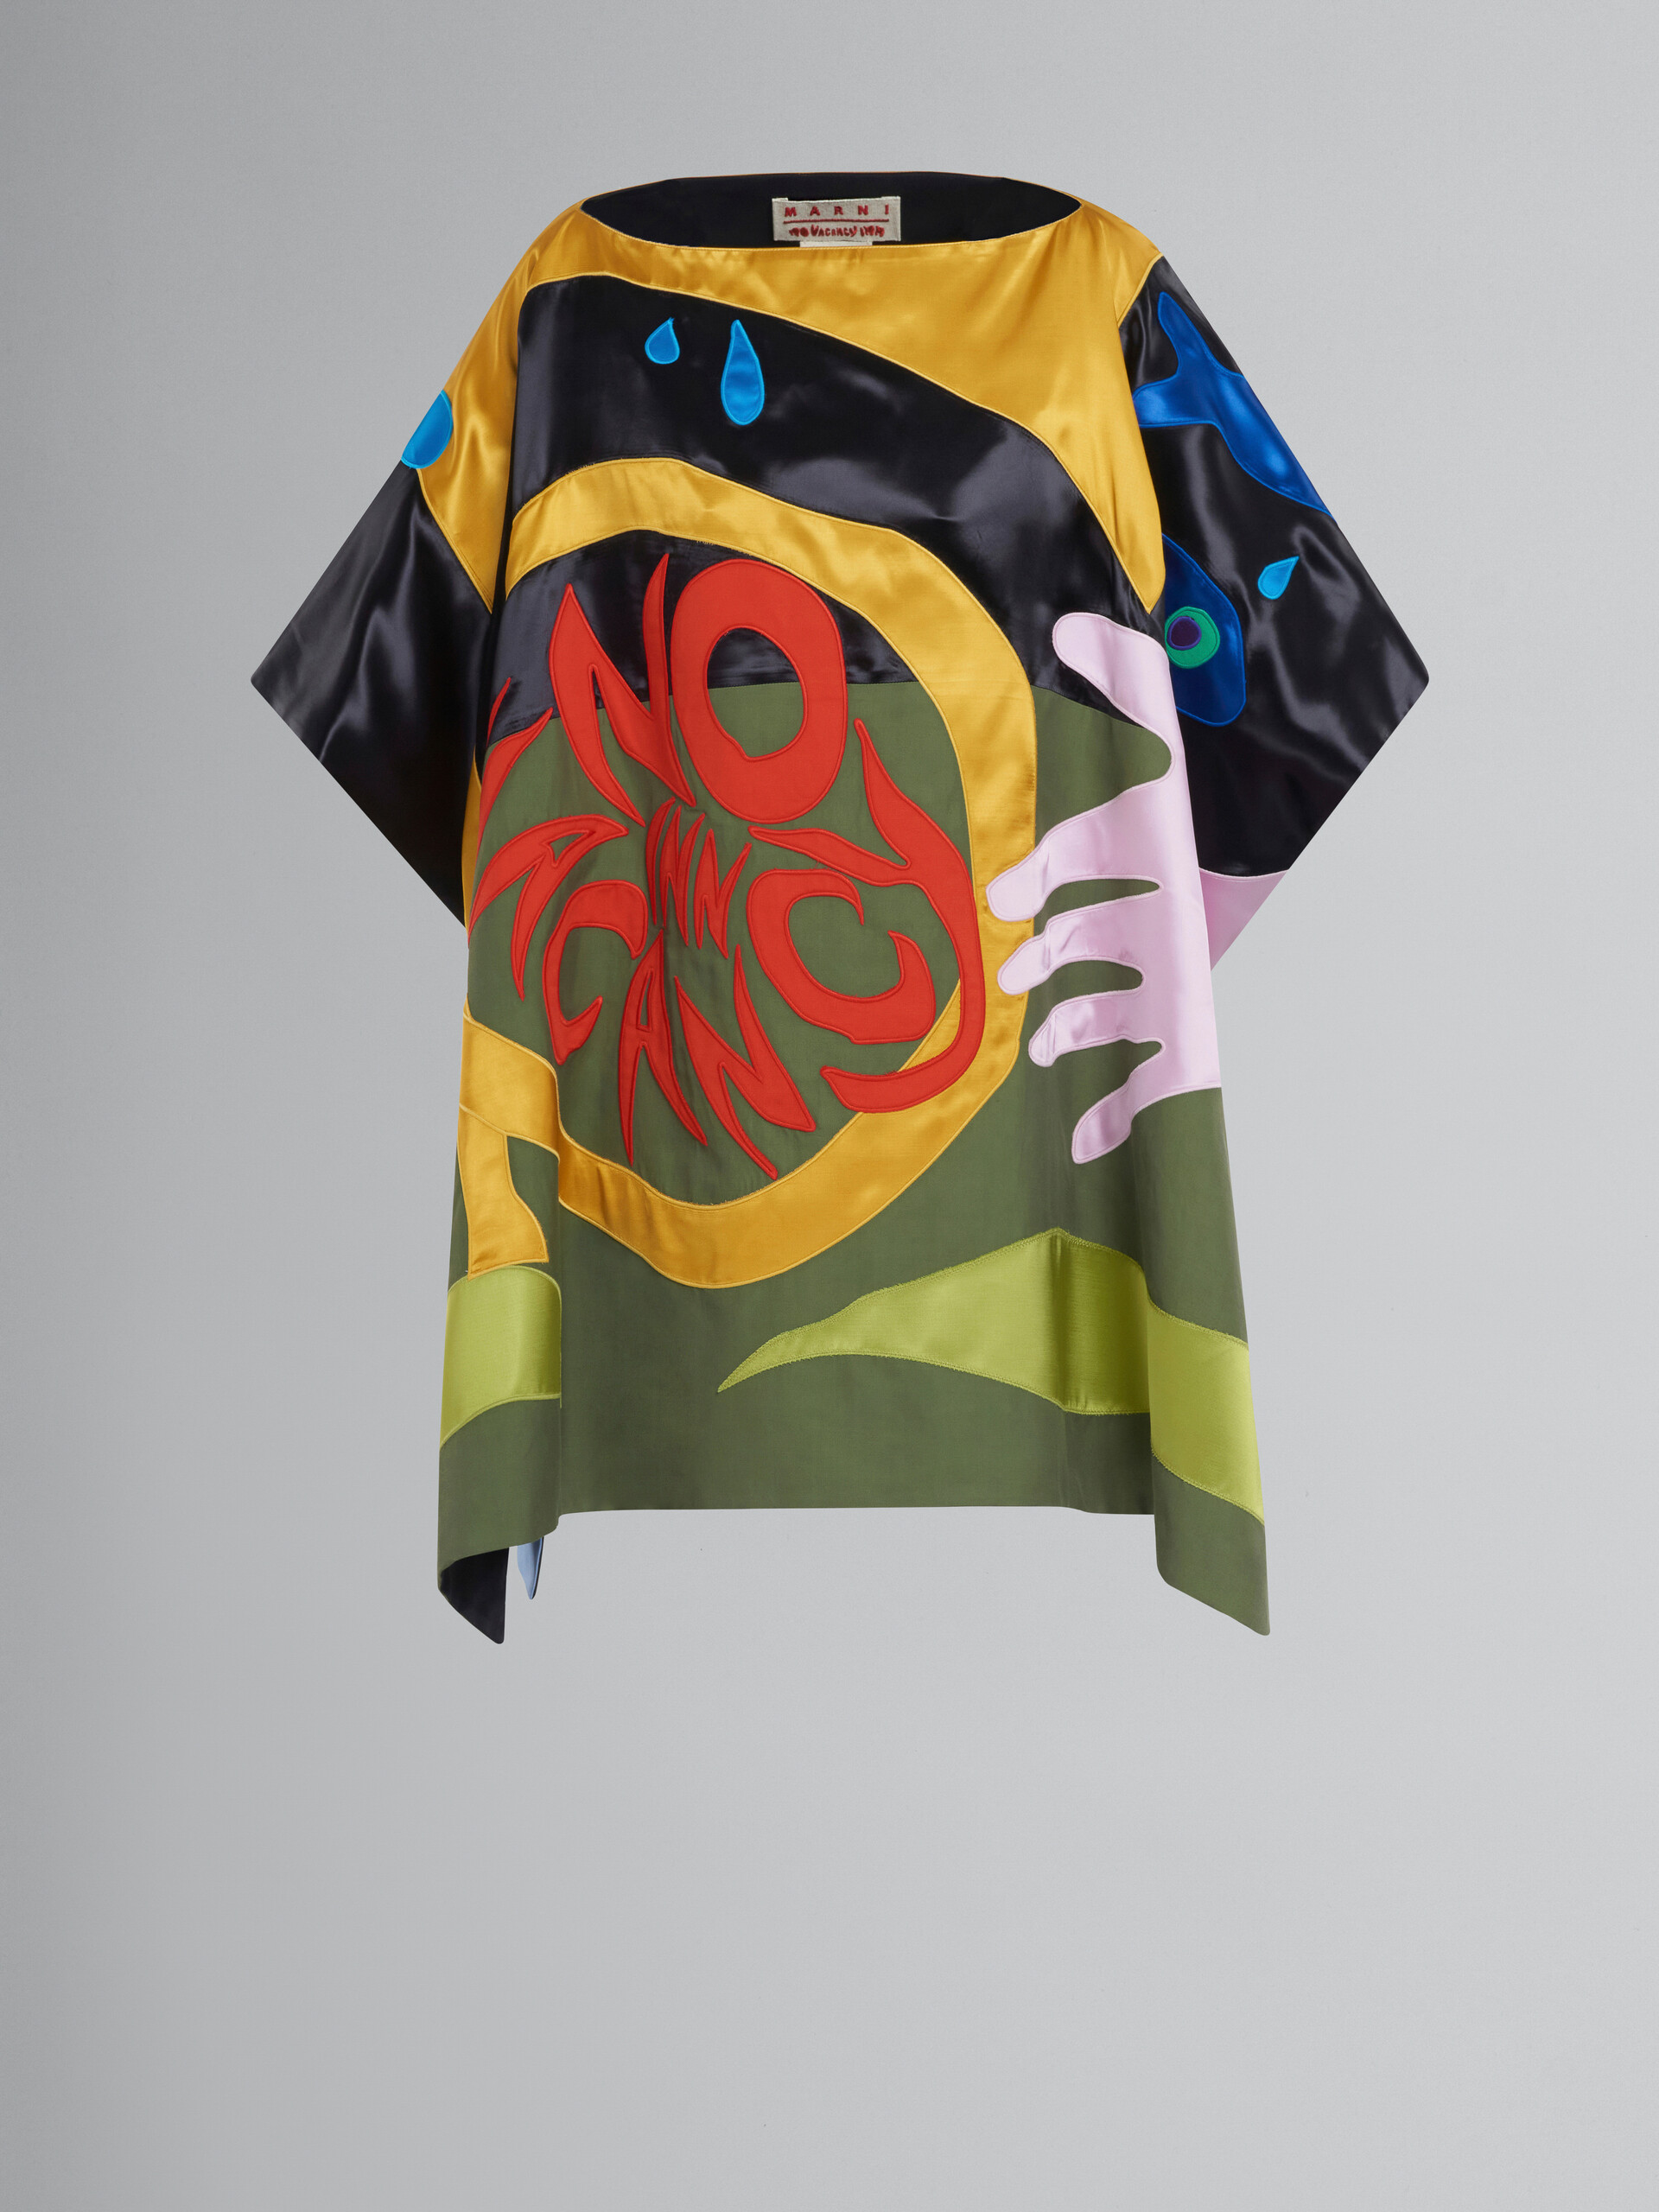 Marni x No Vacancy Inn - Cape top with multicolour patchwork motifs - Shirts - Image 1